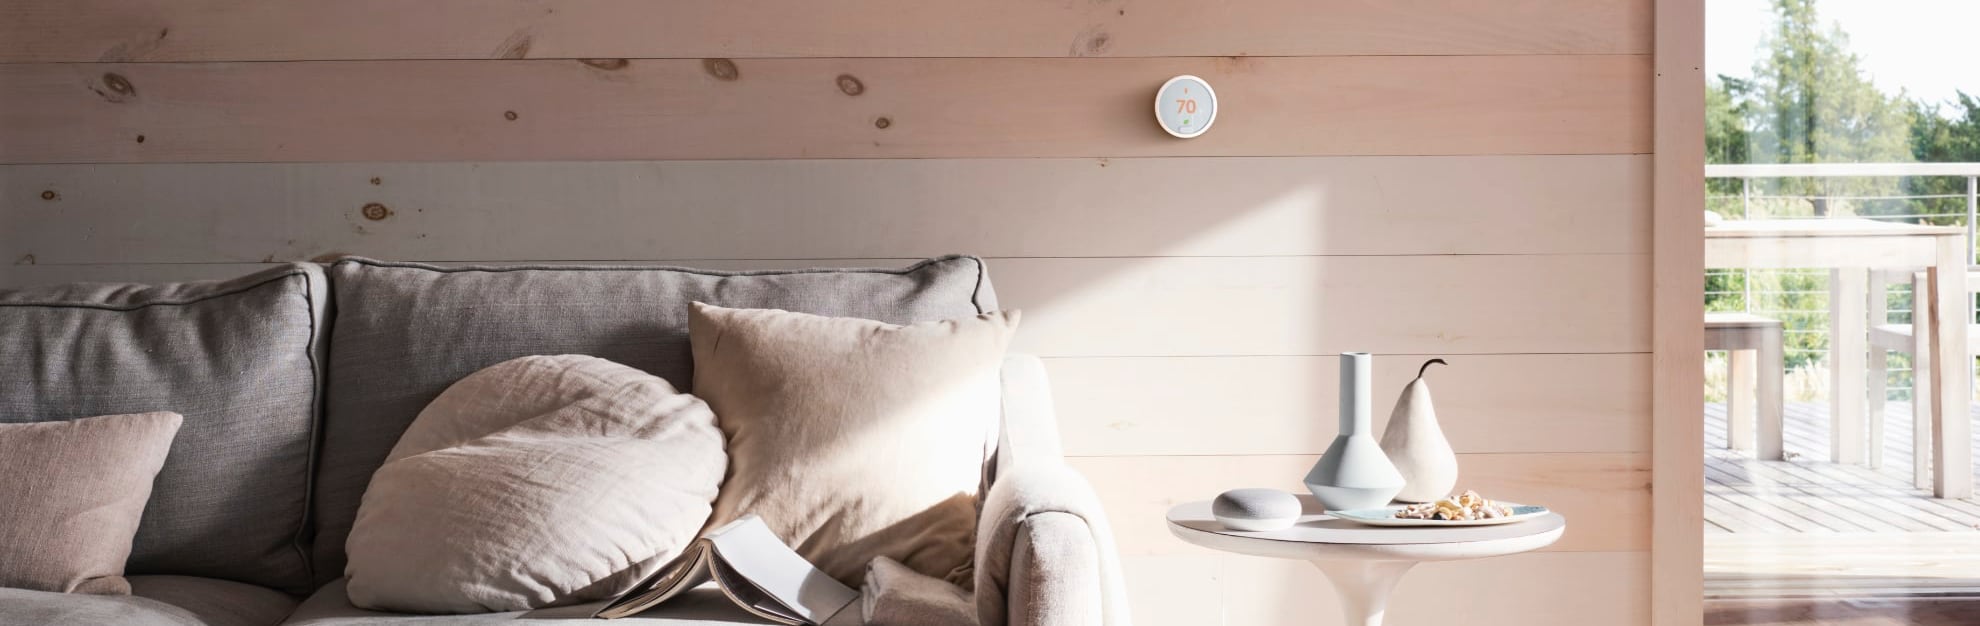 Vivint Home Automation in Grand Rapids